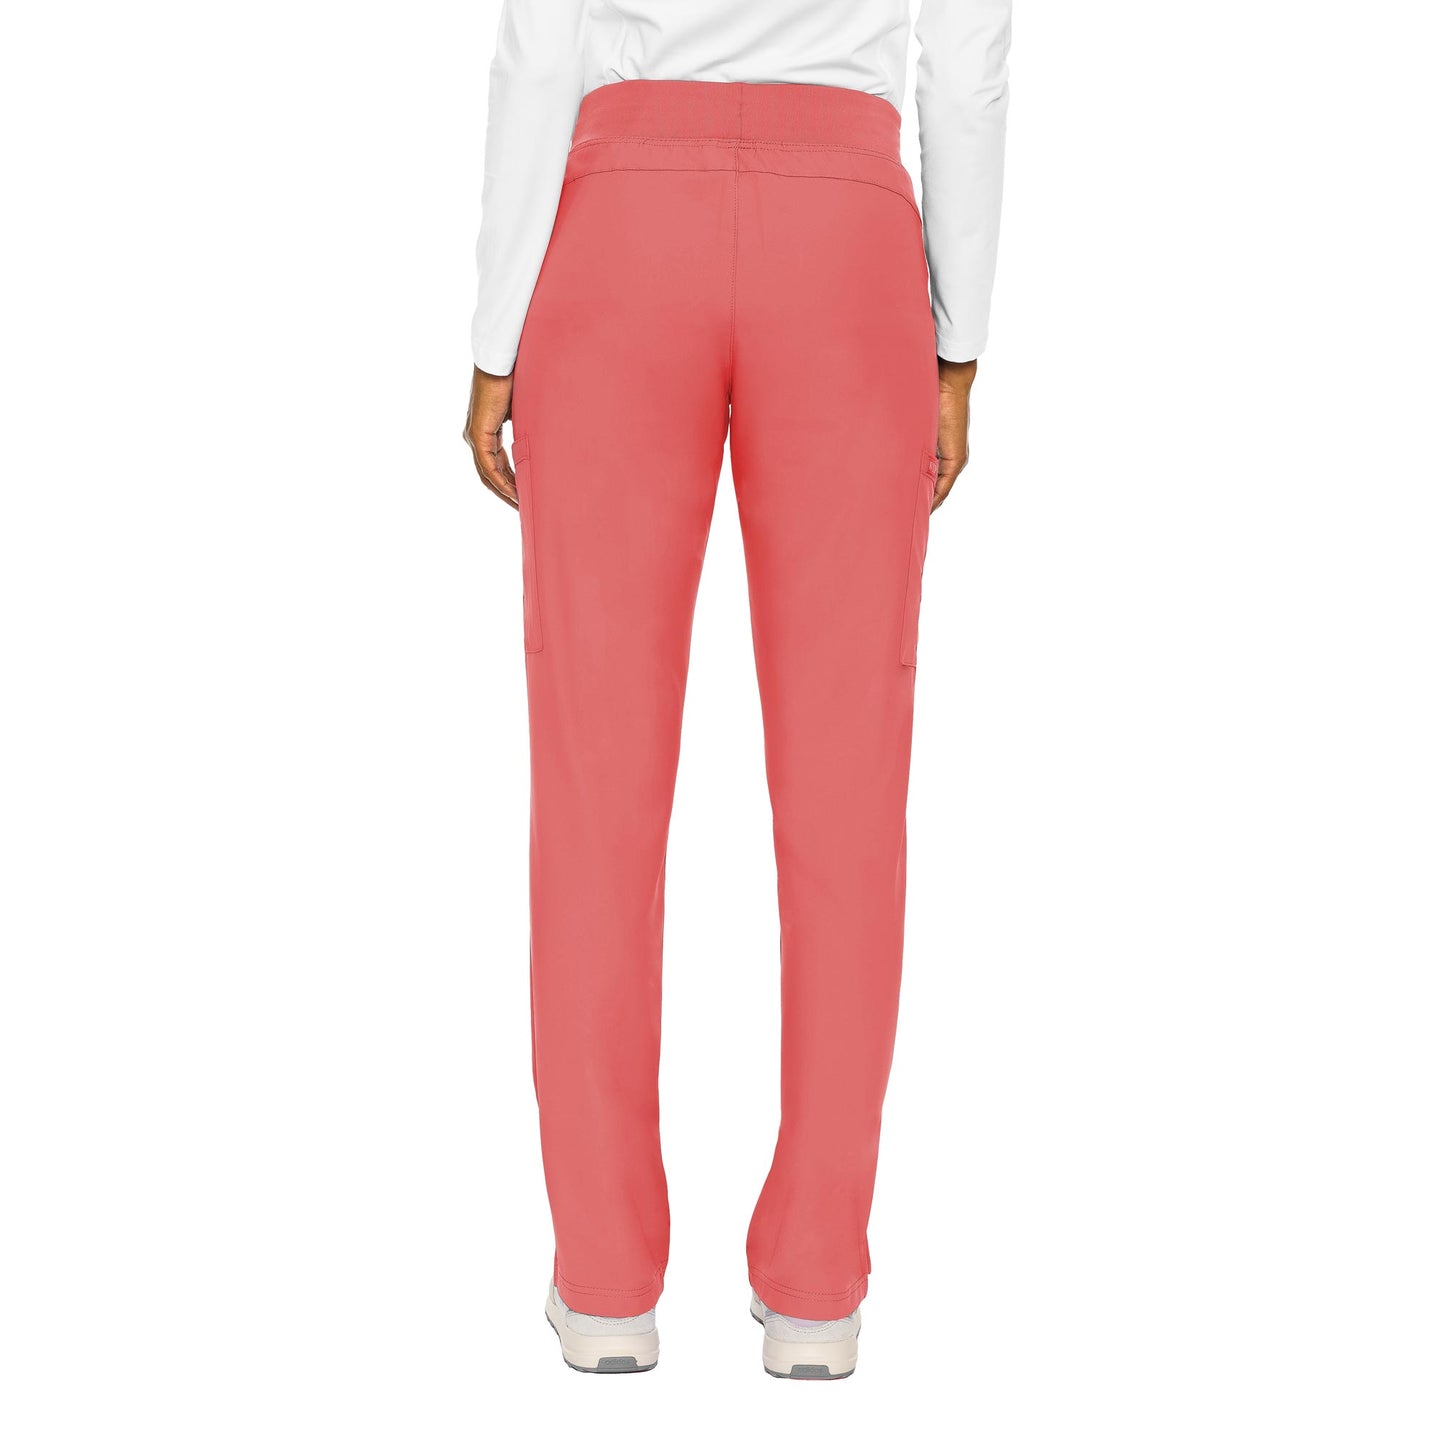 Med Couture Insight Zipper Pant Petite (16 colors in XS-2XL)